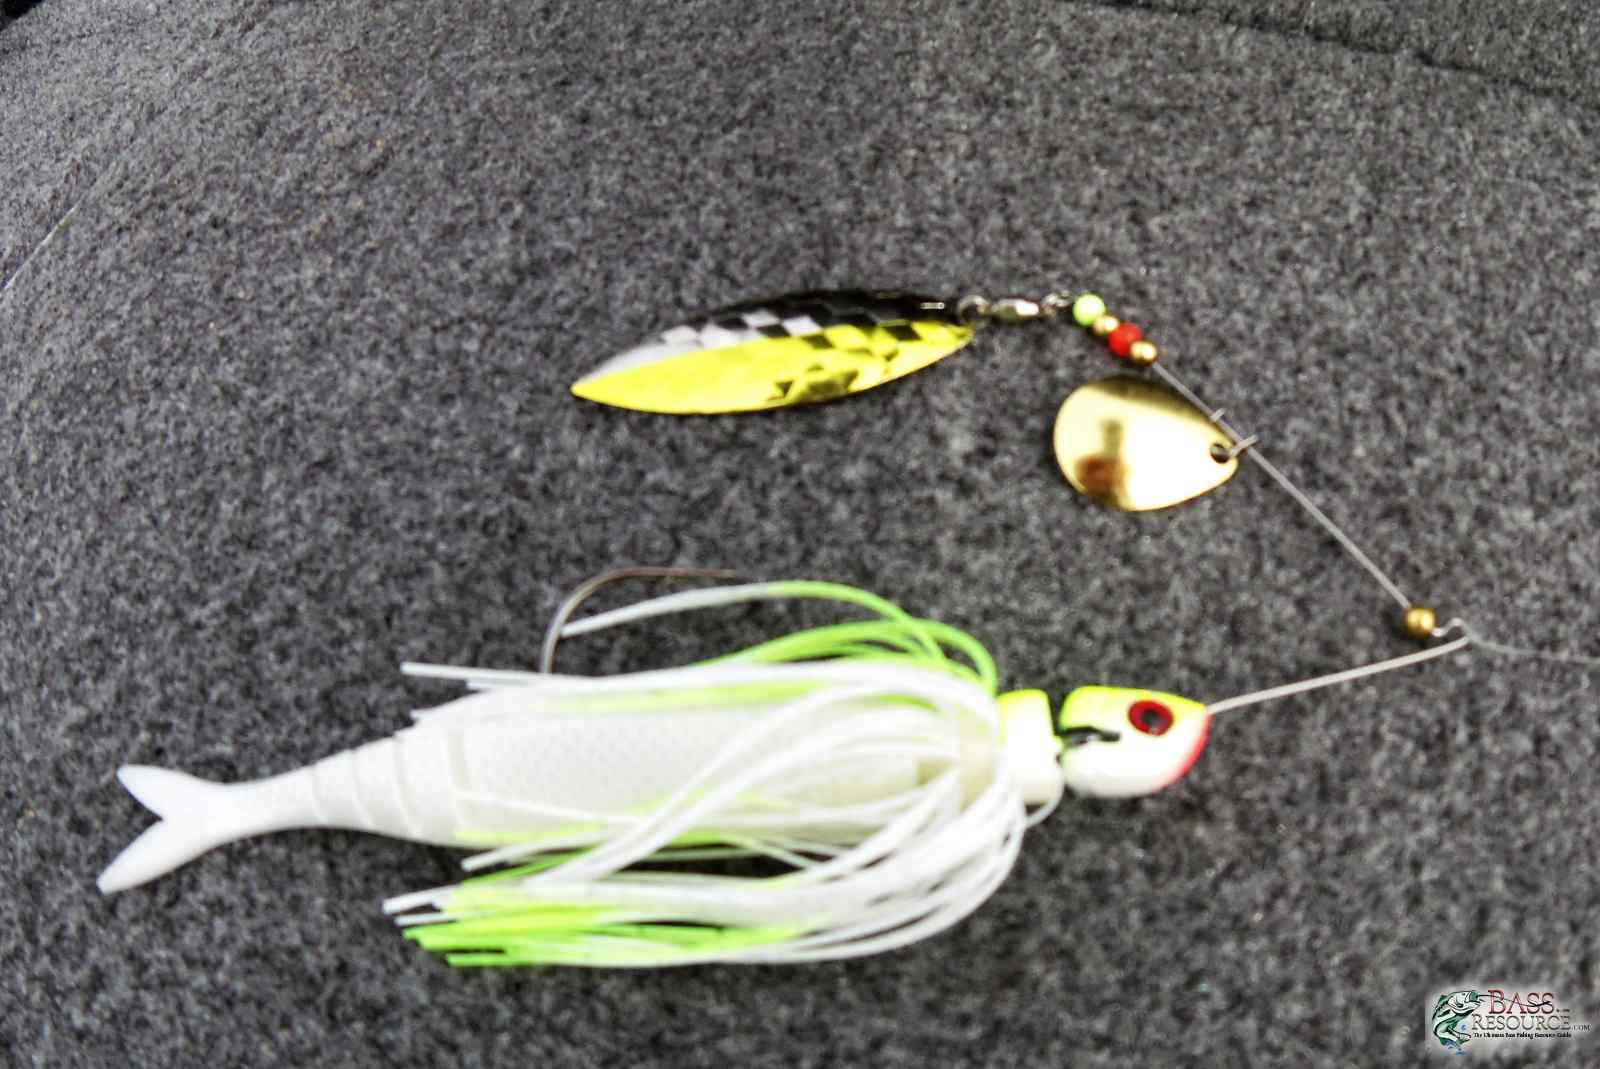 Spinner bait trailer recommendation? - Fishing Tackle - Bass Fishing Forums